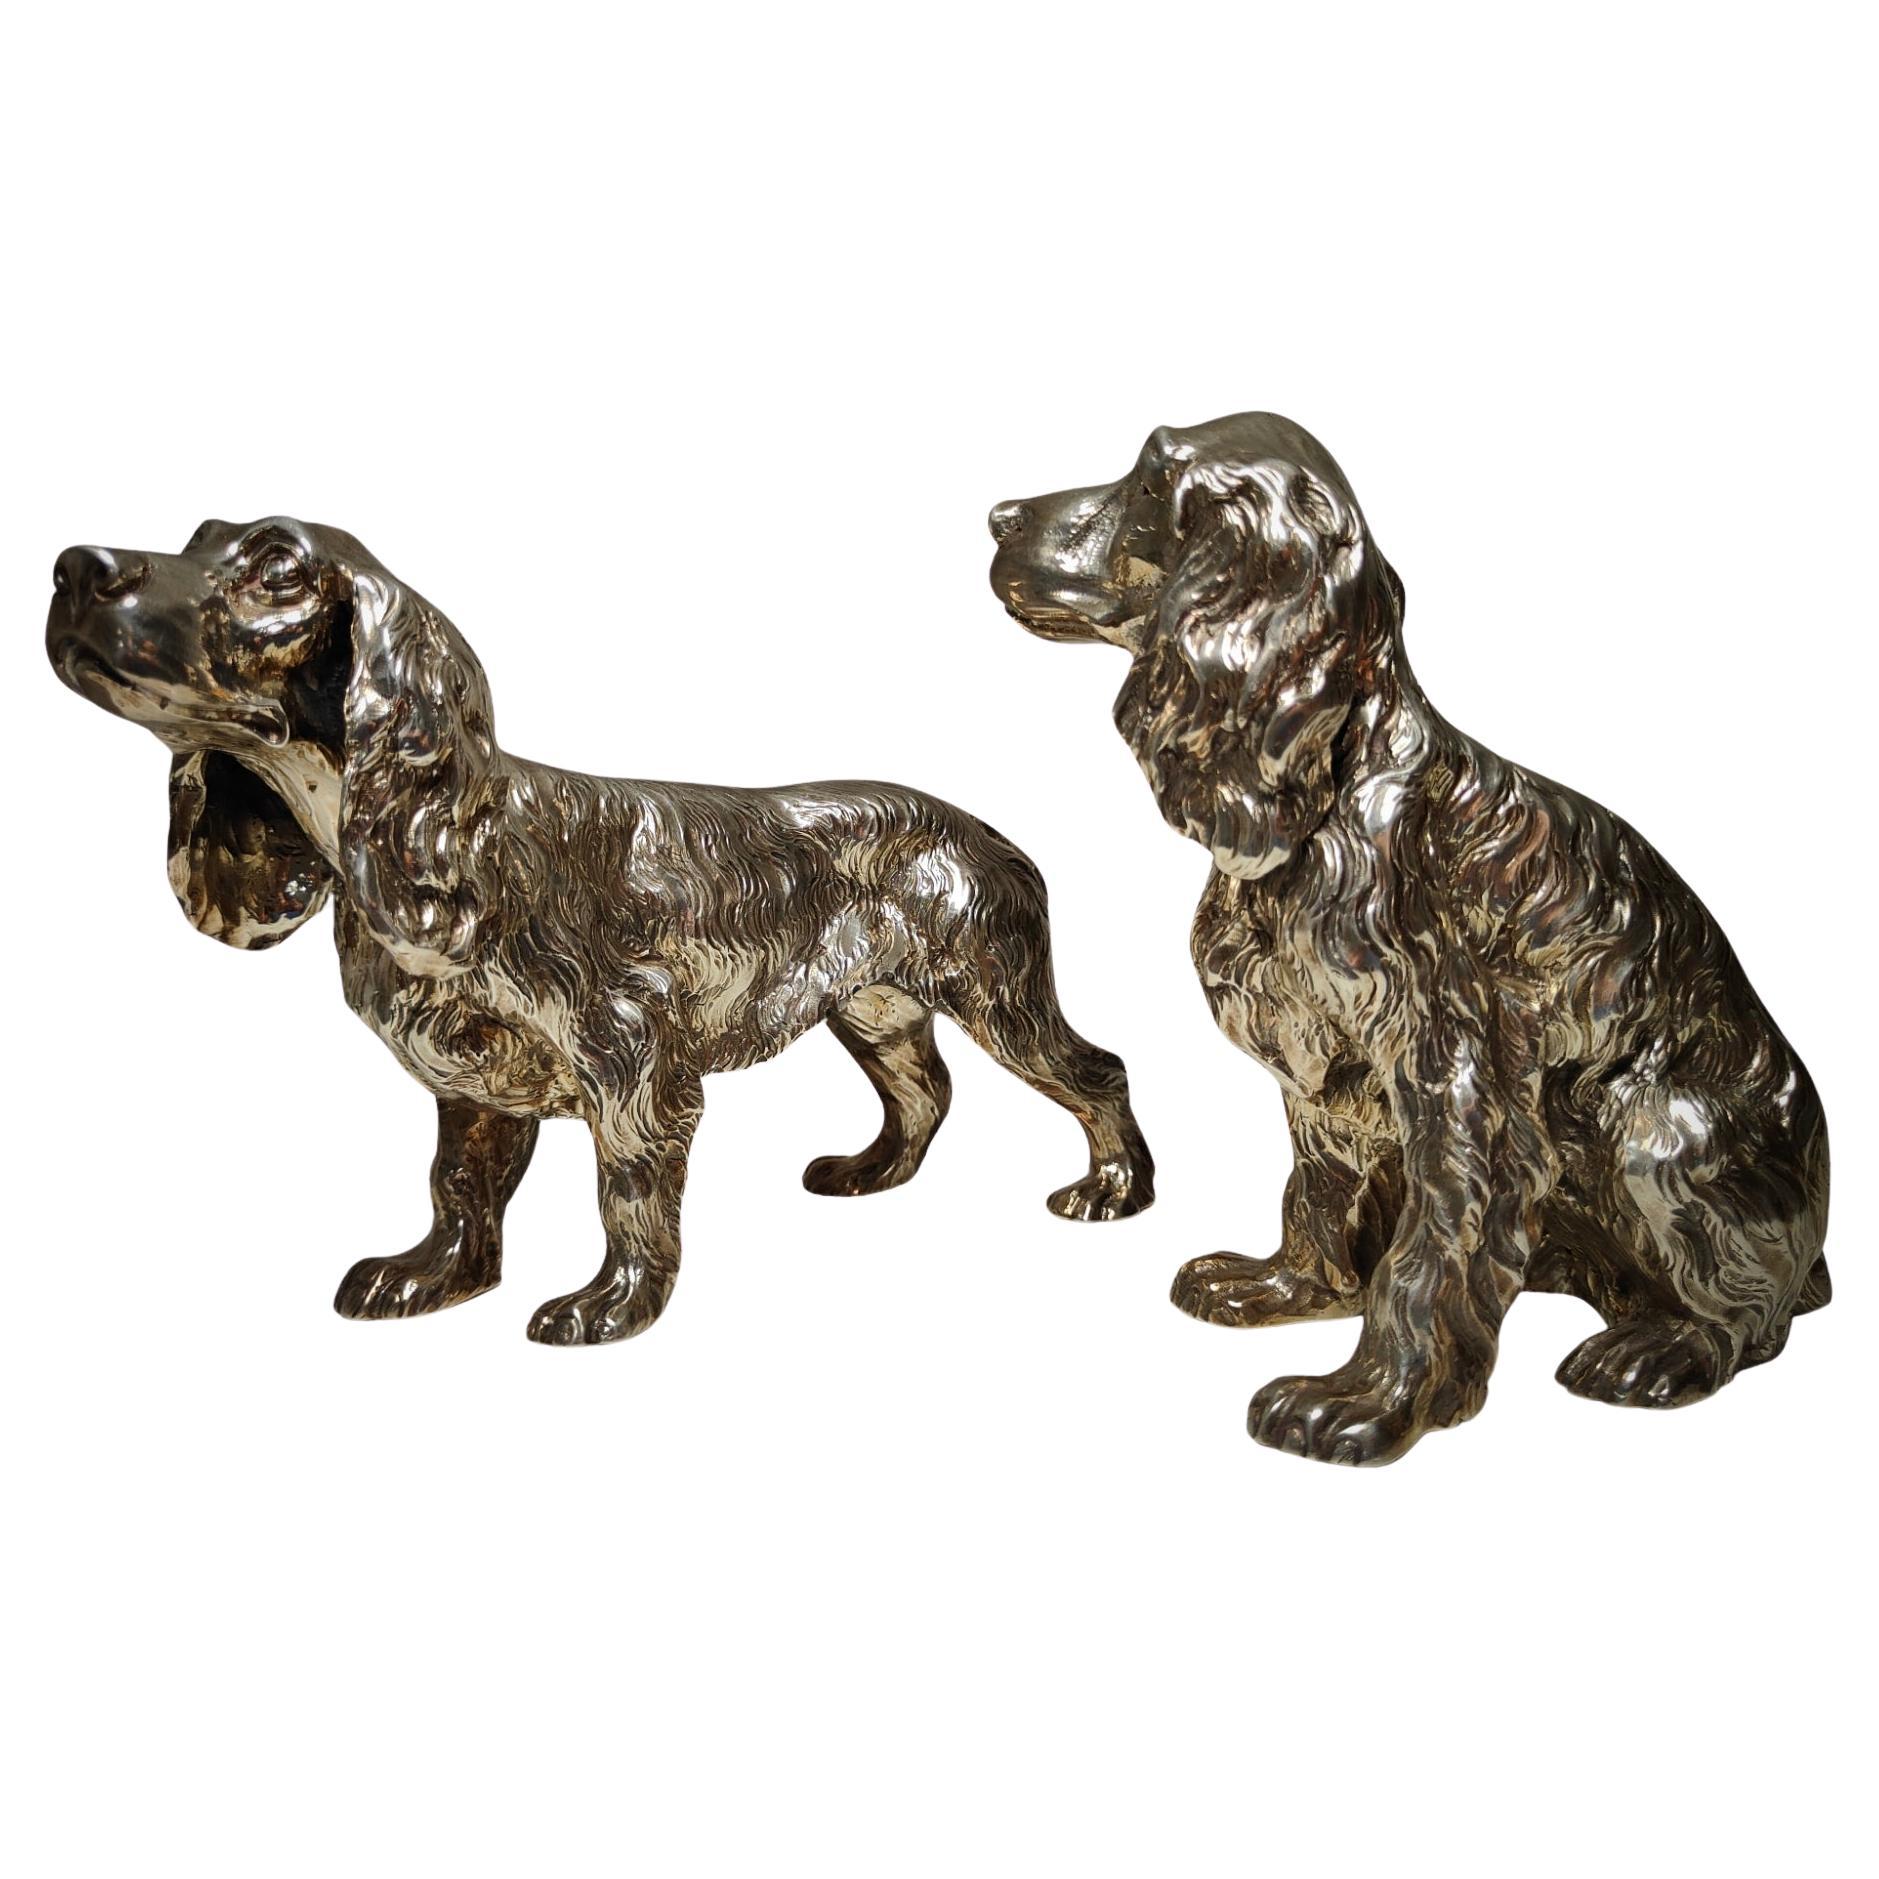 Exquisite Pair of Italian Solid Silver Cocker Spaniel Dogs For Sale